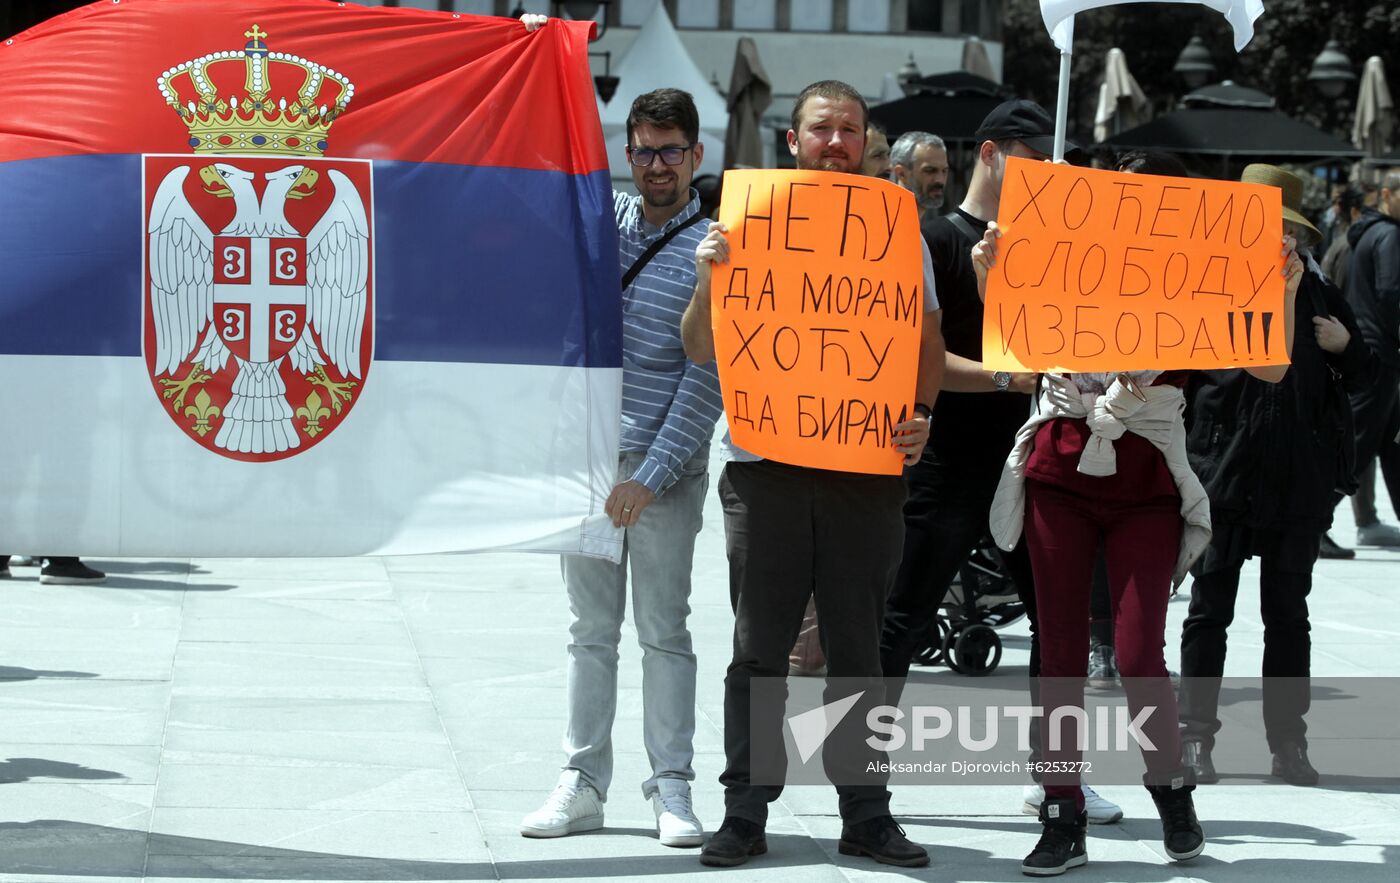 Serbia Protests